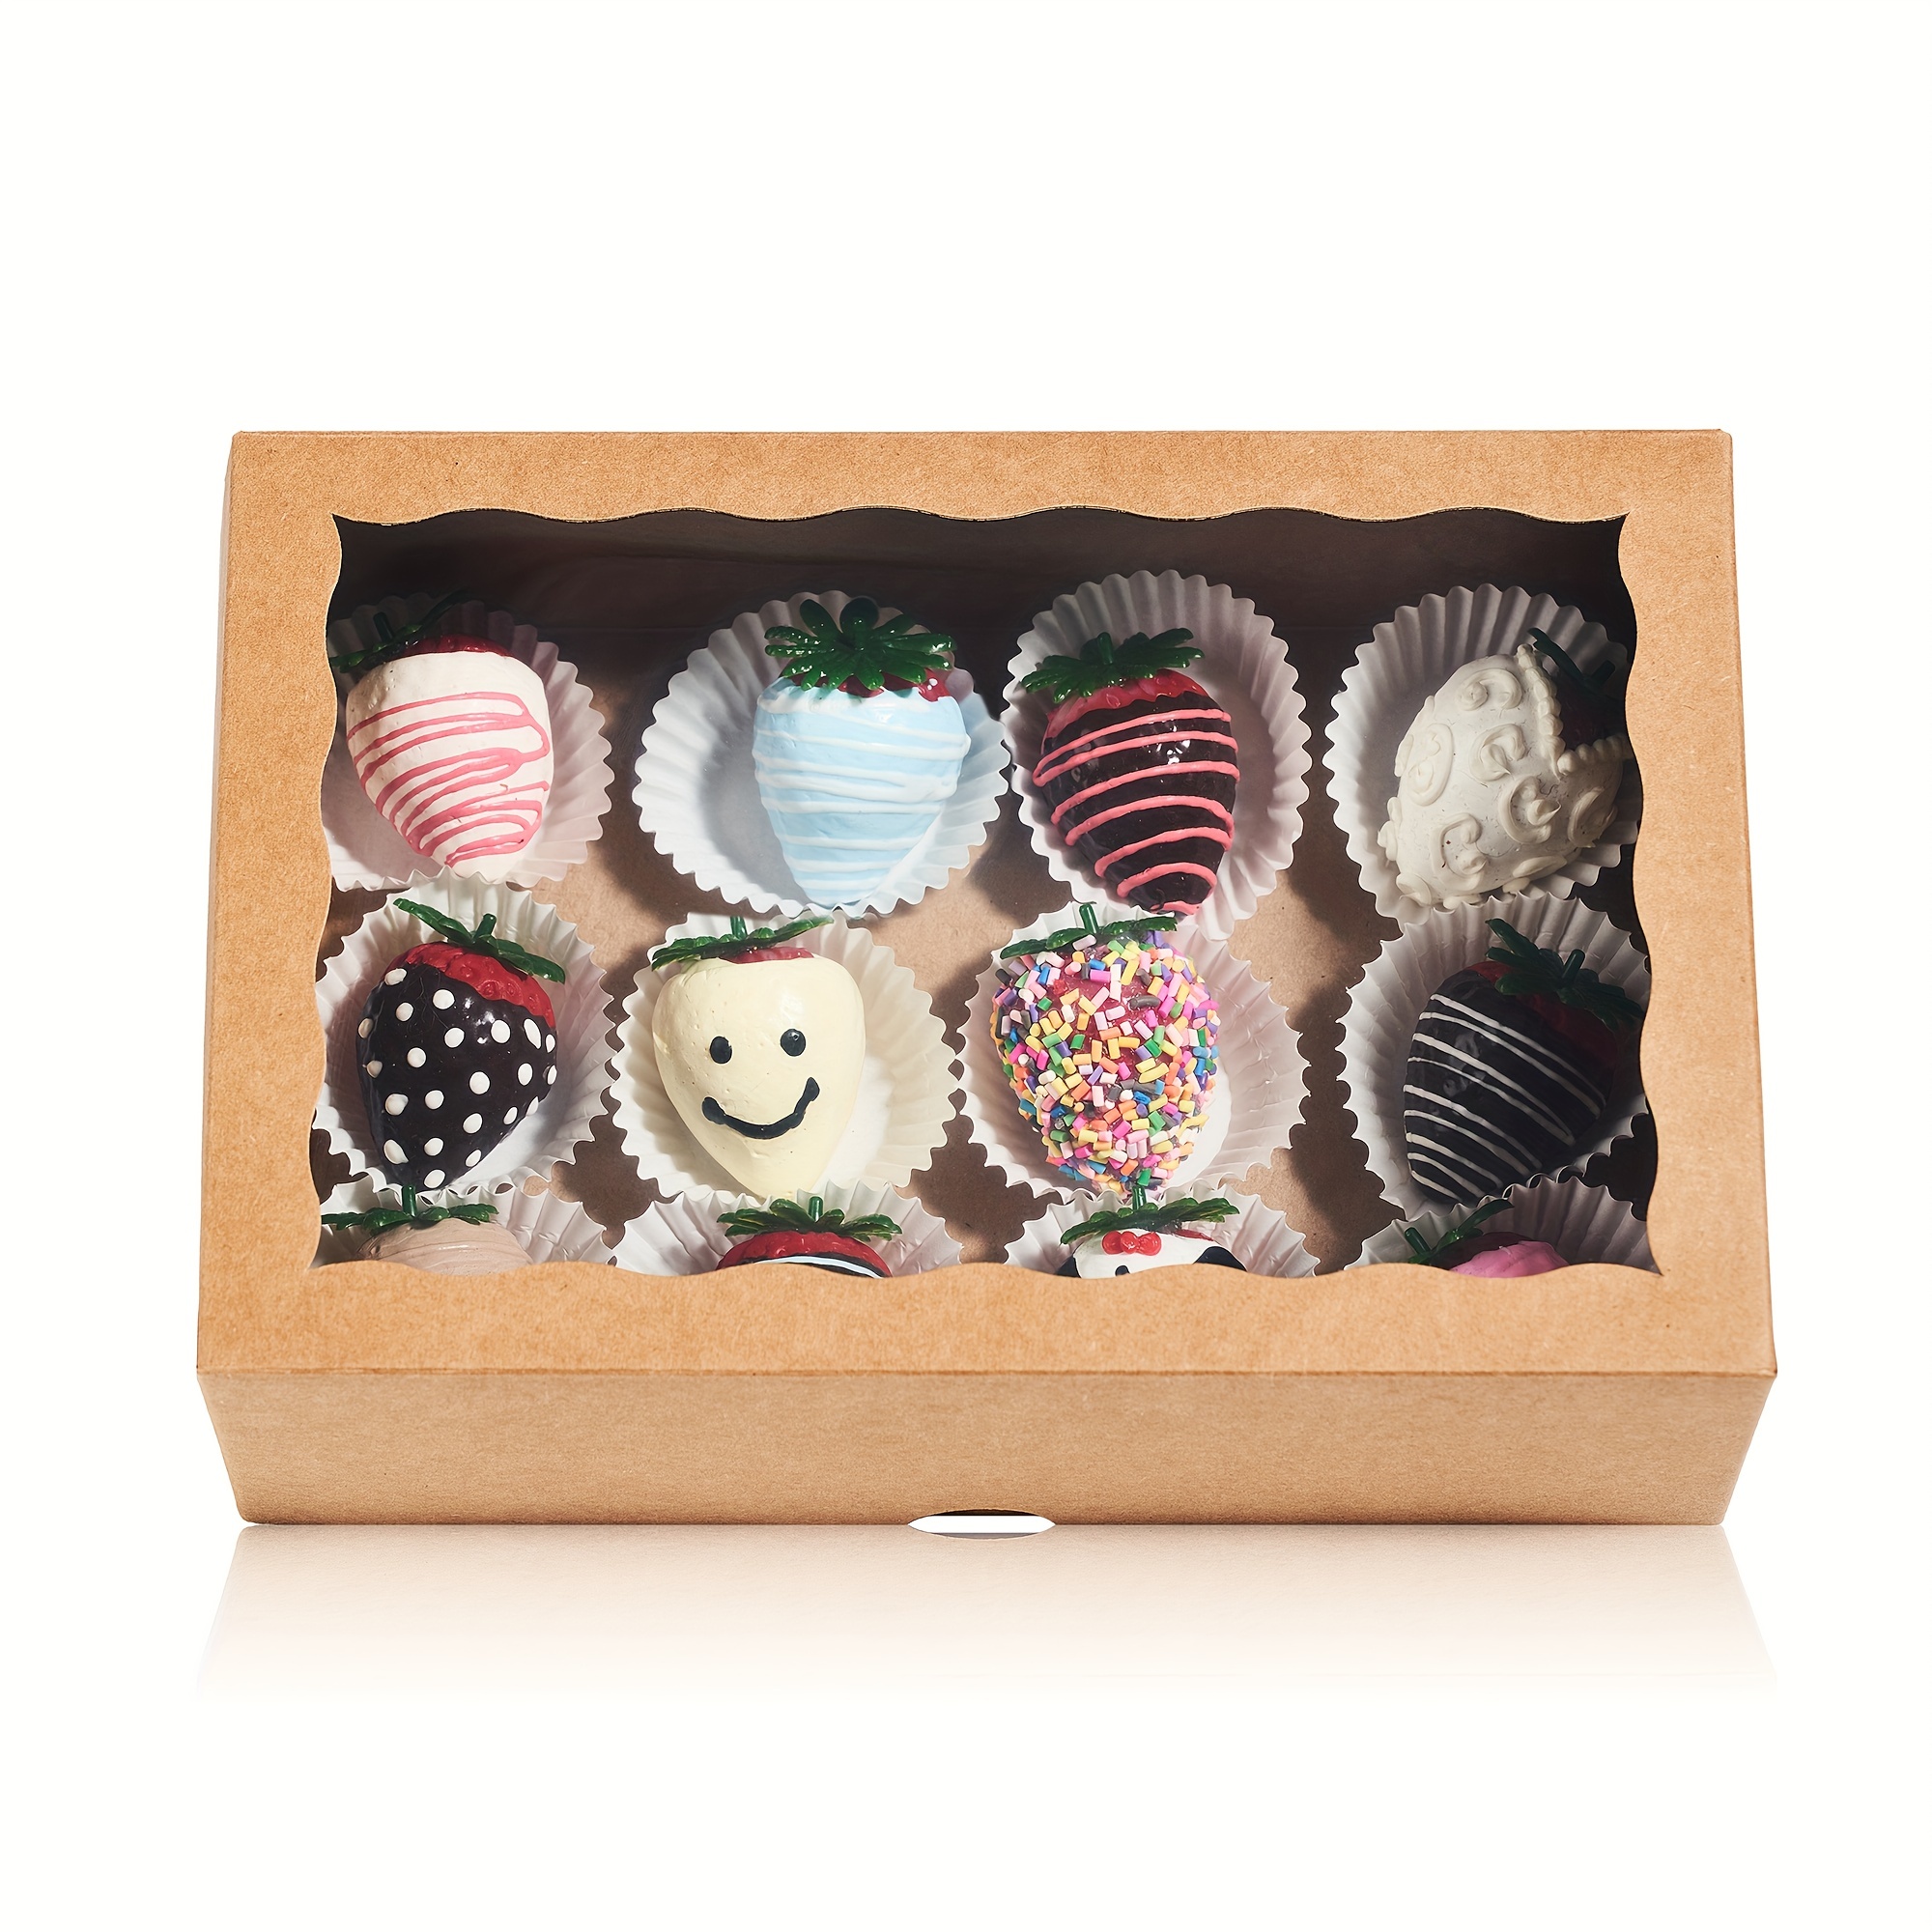 10/20pcs, 12x2.25x2 Inches Chocolate Covered Strawberries Boxes For 6  Macaron Boxes For 12, Chocolate Truffle Boxes Cocoa Bombs Boxes Pretzel  Boxes Co